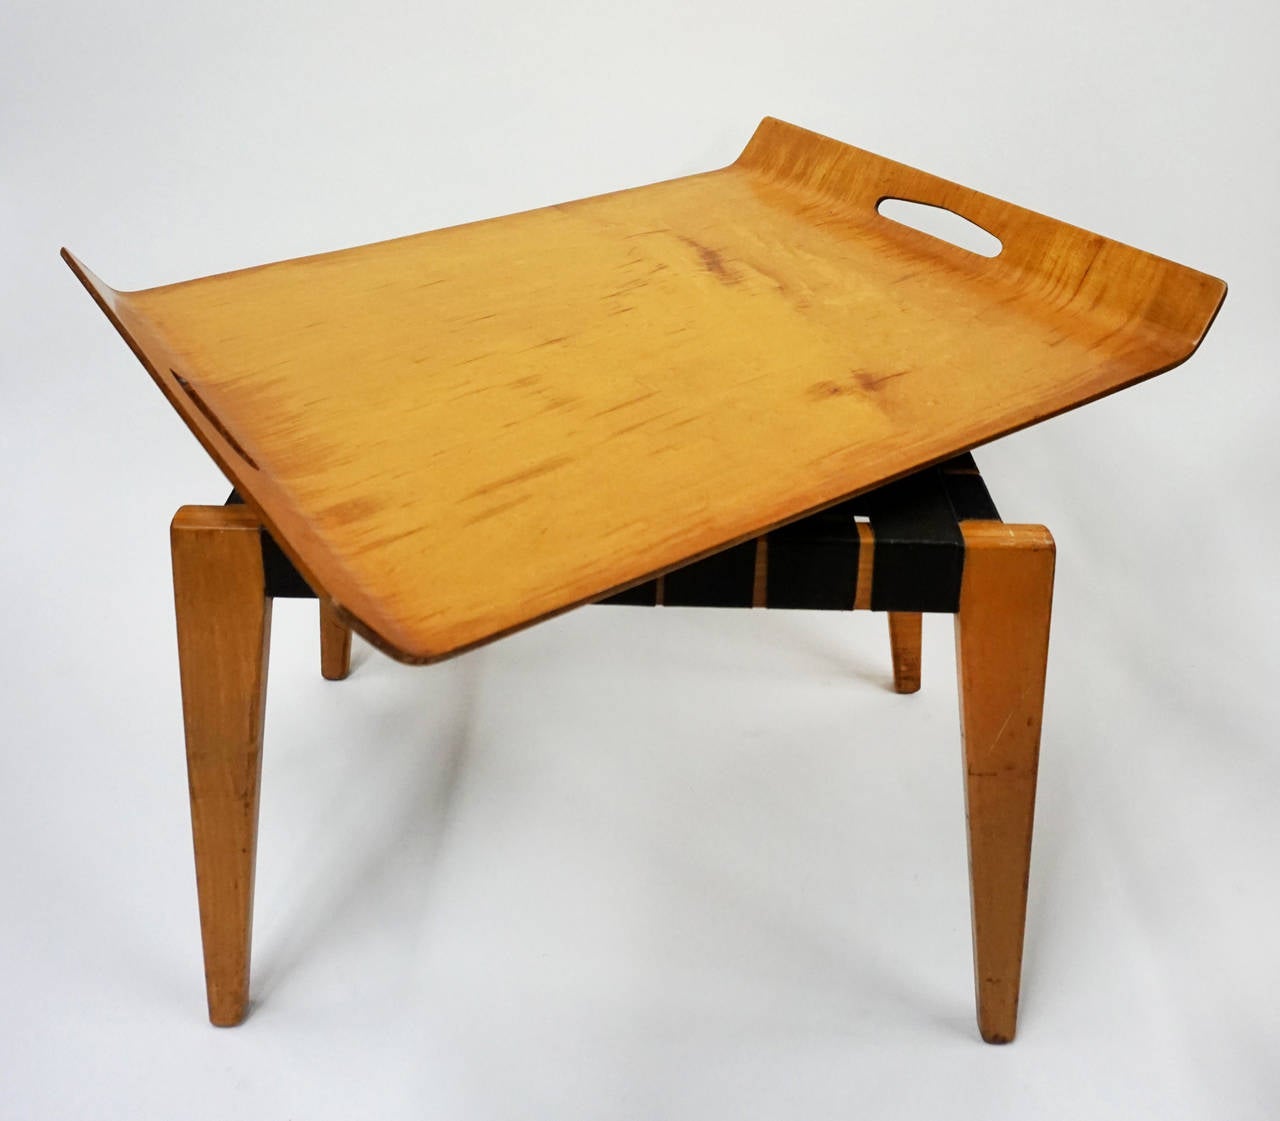 Bentwood tray on a webbed table by Abel Sorenson for Knoll. Original straps. Produced for only four years (1946-1950).

Tray: 24.5″ W x 19″ D x 1.75″ H. 
Stool: 19″ W x 14.75″ D x 16″ H